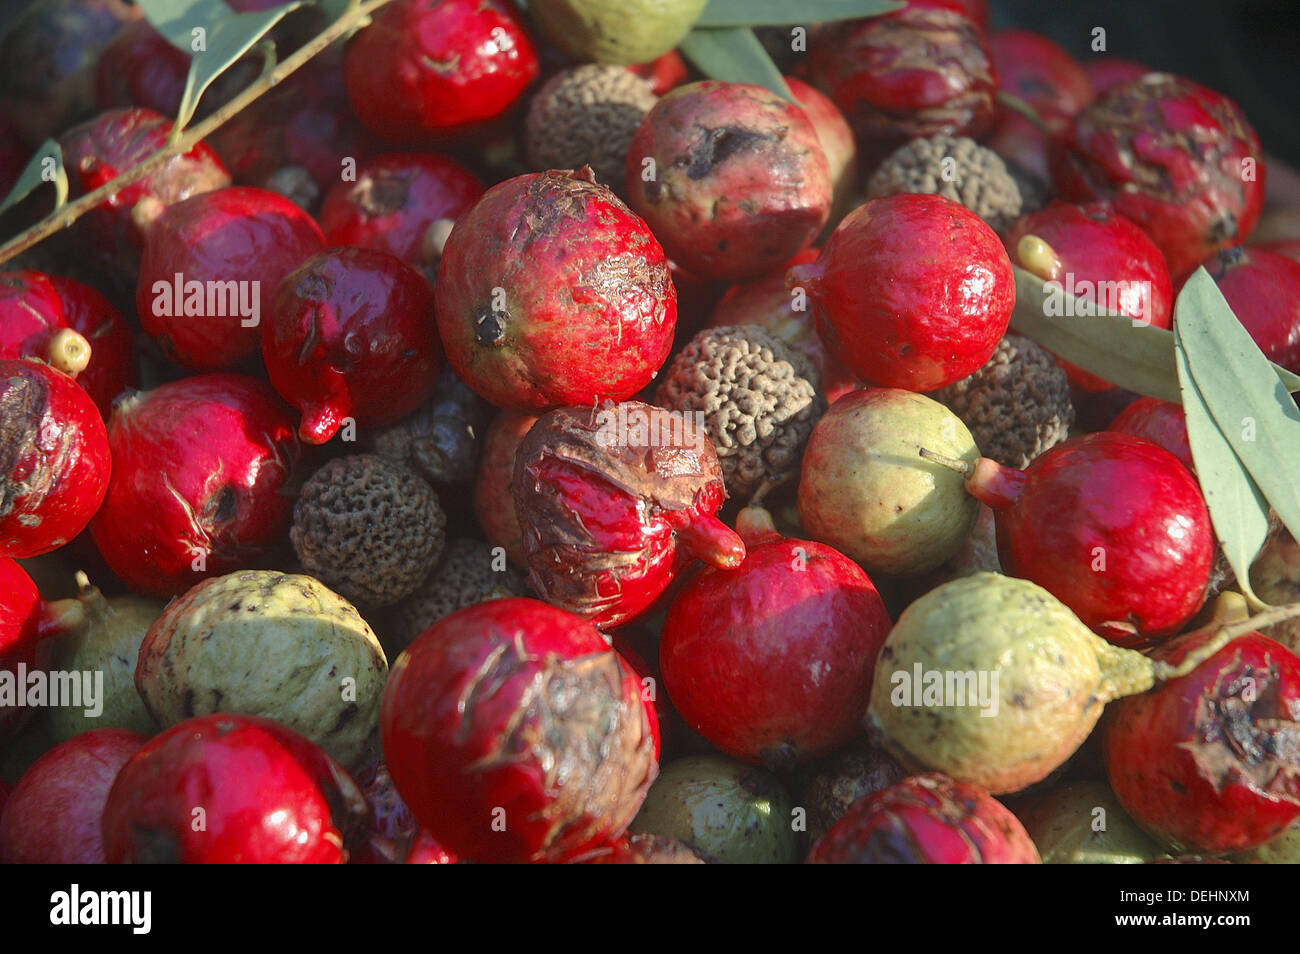 Quandong Fruit High Resolution Stock Photography and Images - Alamy